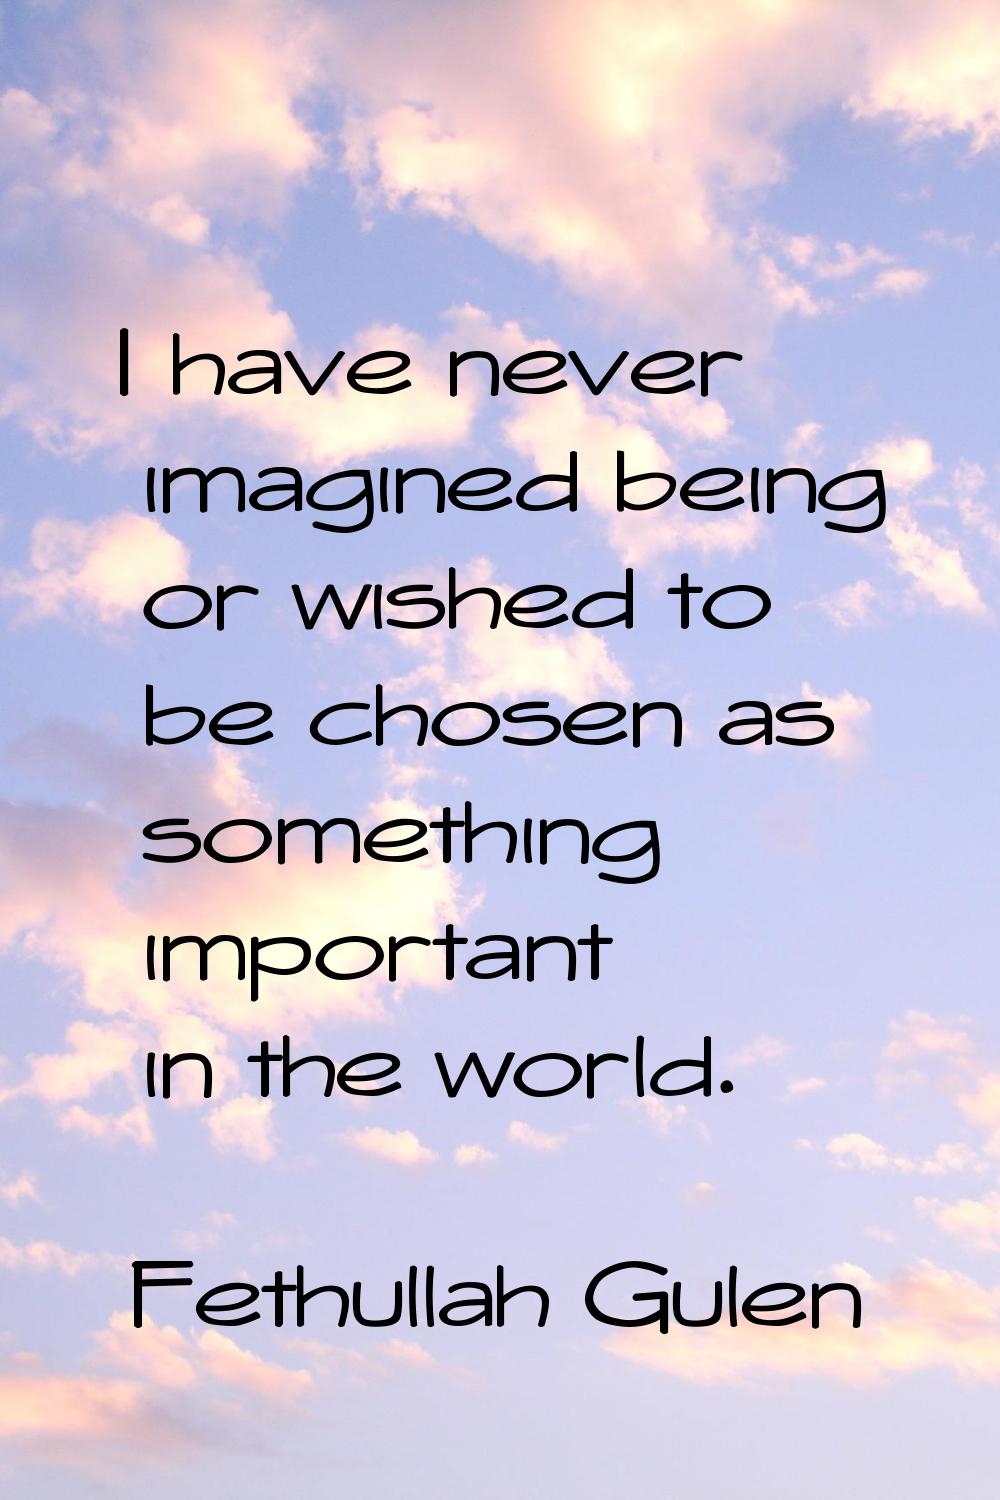 I have never imagined being or wished to be chosen as something important in the world.